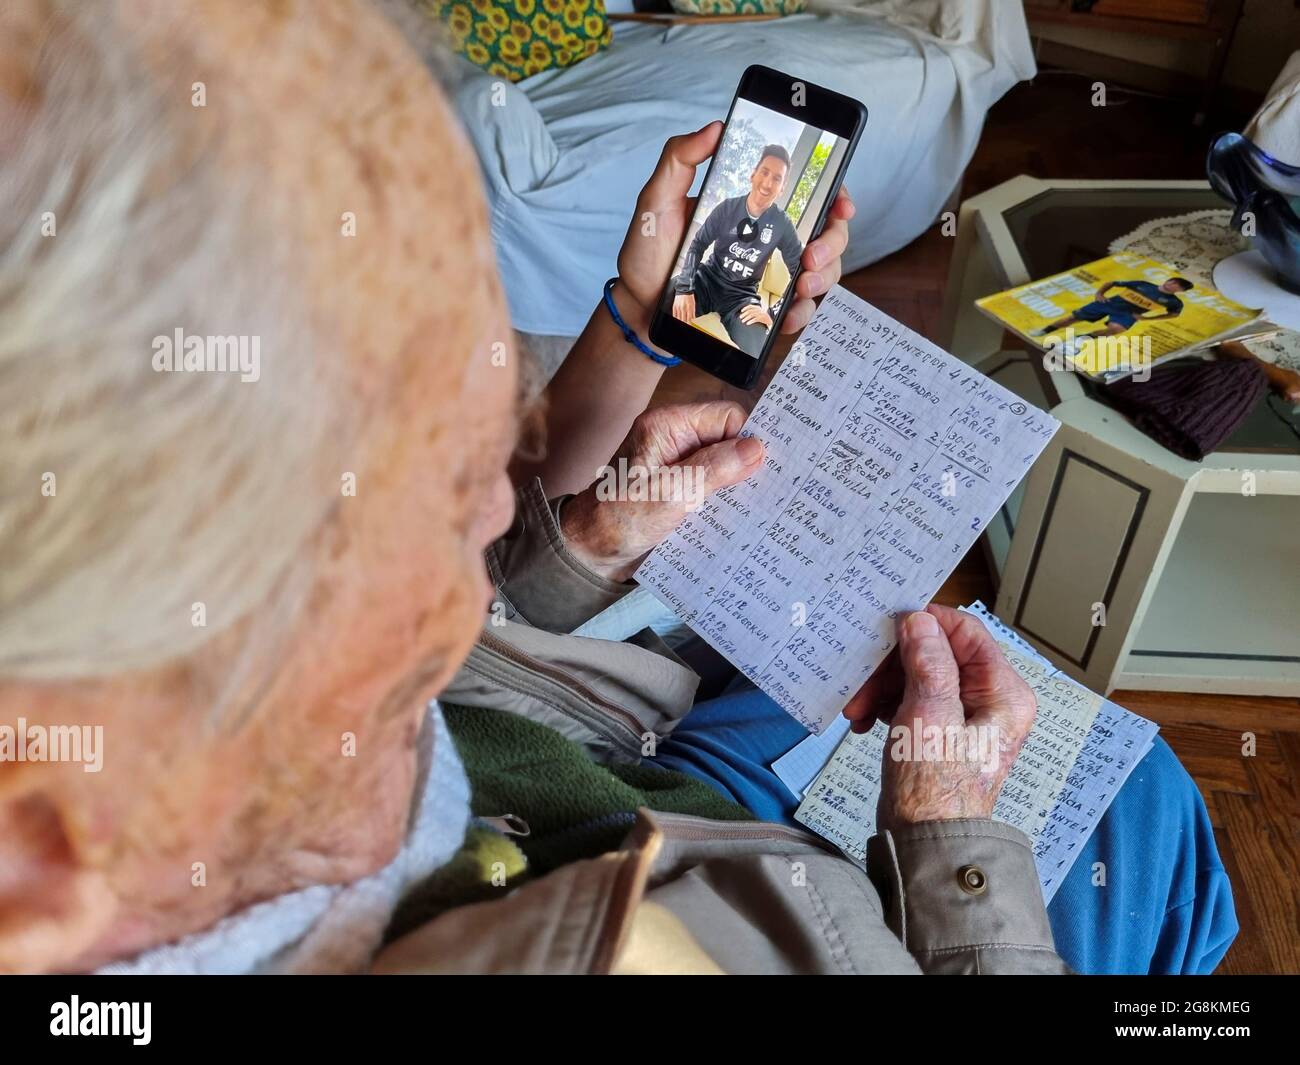 Hernan Mastrangelo, a 100-year-old former chocolatier and a fan of Argentine soccer star Lionel Messi, holds his handwritten notes of Messi's goals, as his grandson Julian holds a mobile phone with a personalised message from Messi, in Buenos Aires, Argentina July 20, 2021. Picture taken July 20, 2021. REUTERS/Miguel Lo Bianco Stock Photo